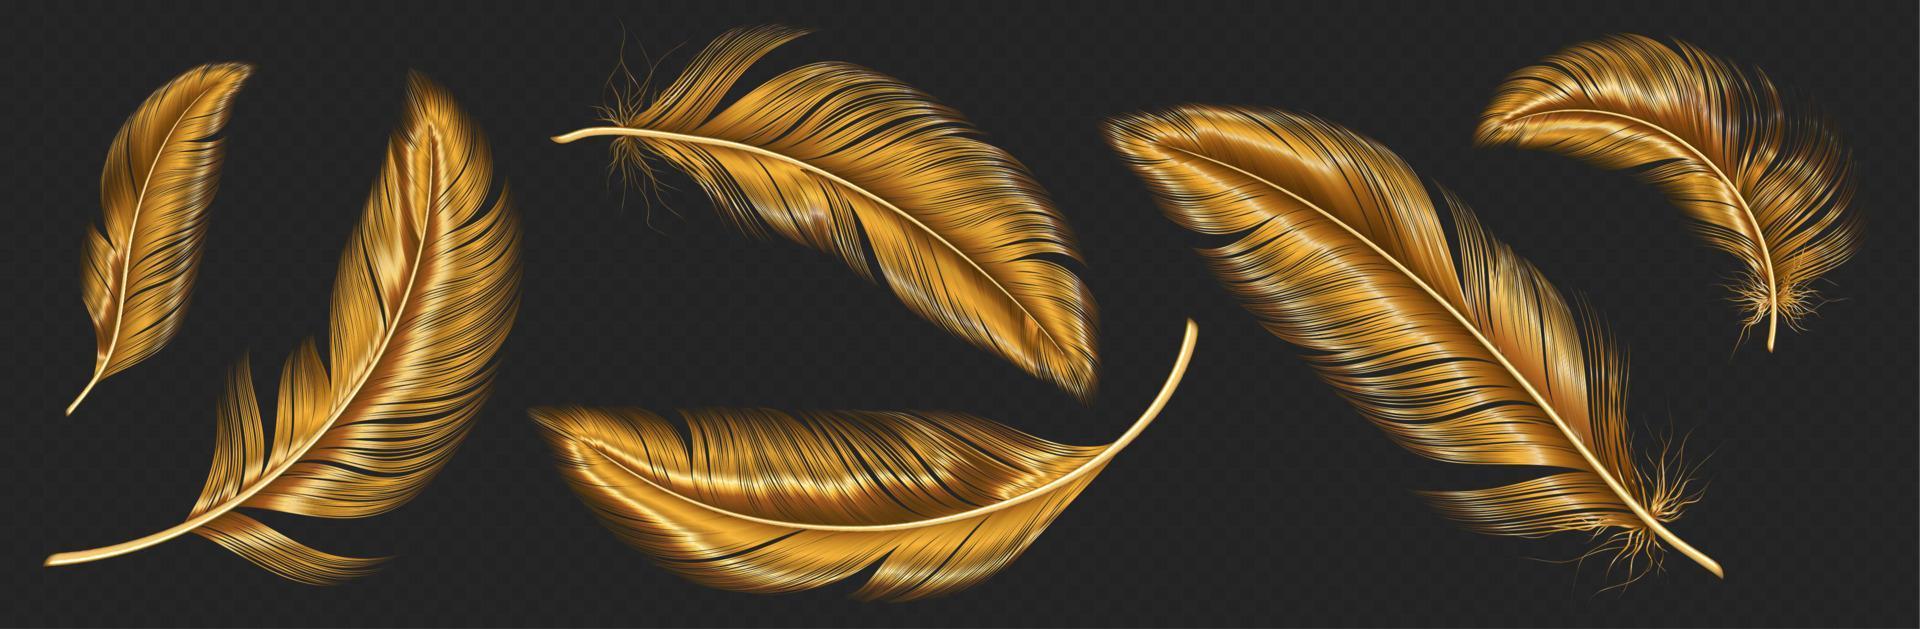 Gold feathers, bird wings plumage vector